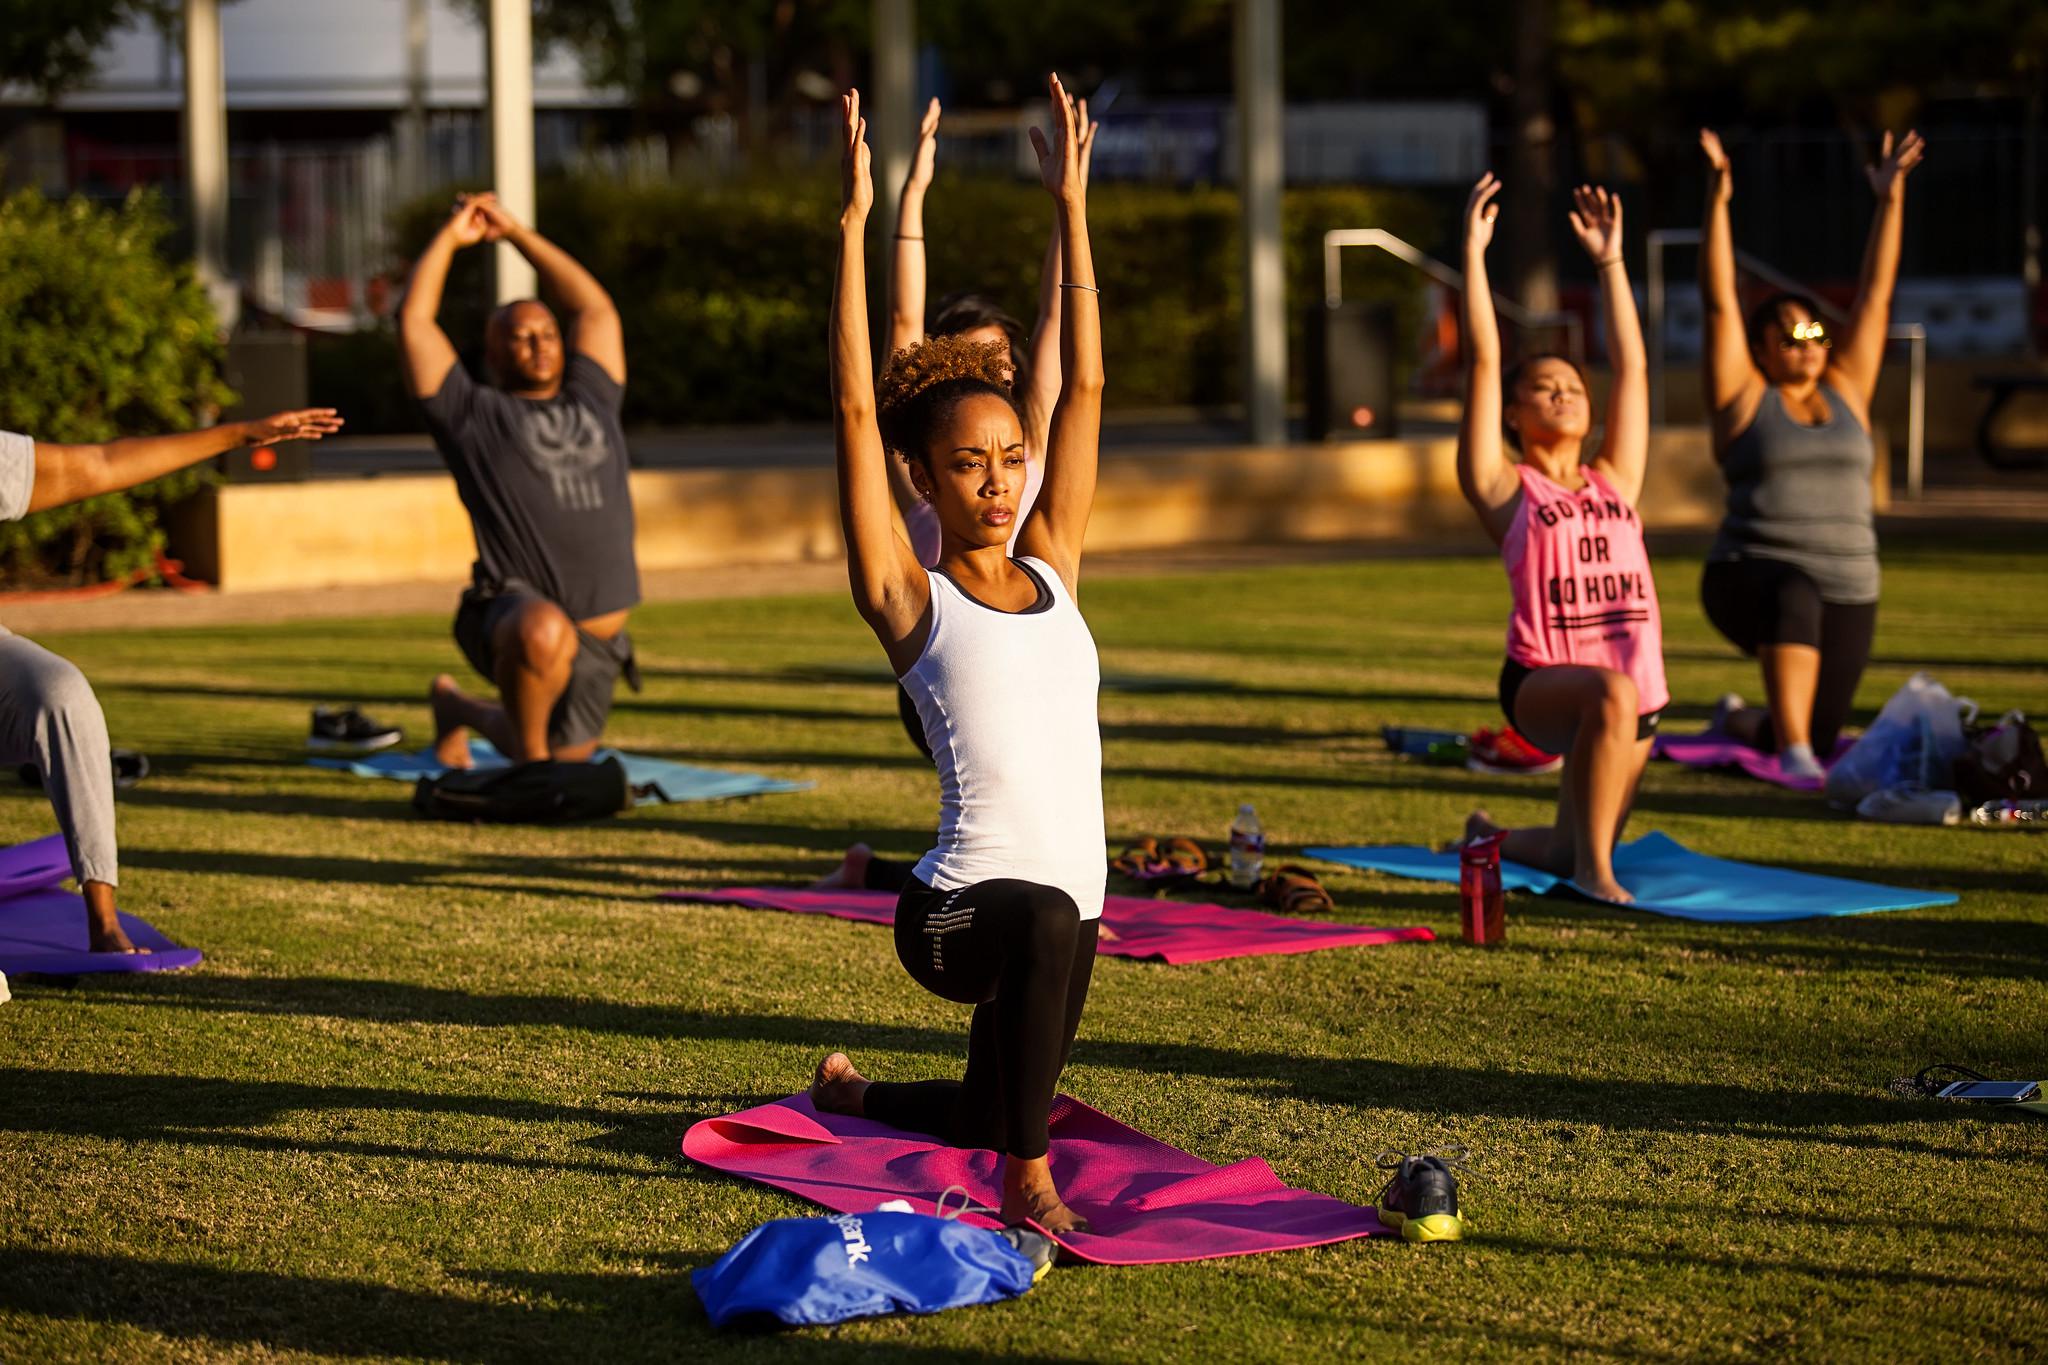 Fitness Events Around Houston Core Focused Yoga And Passes Pedals And A Picnic In The Park